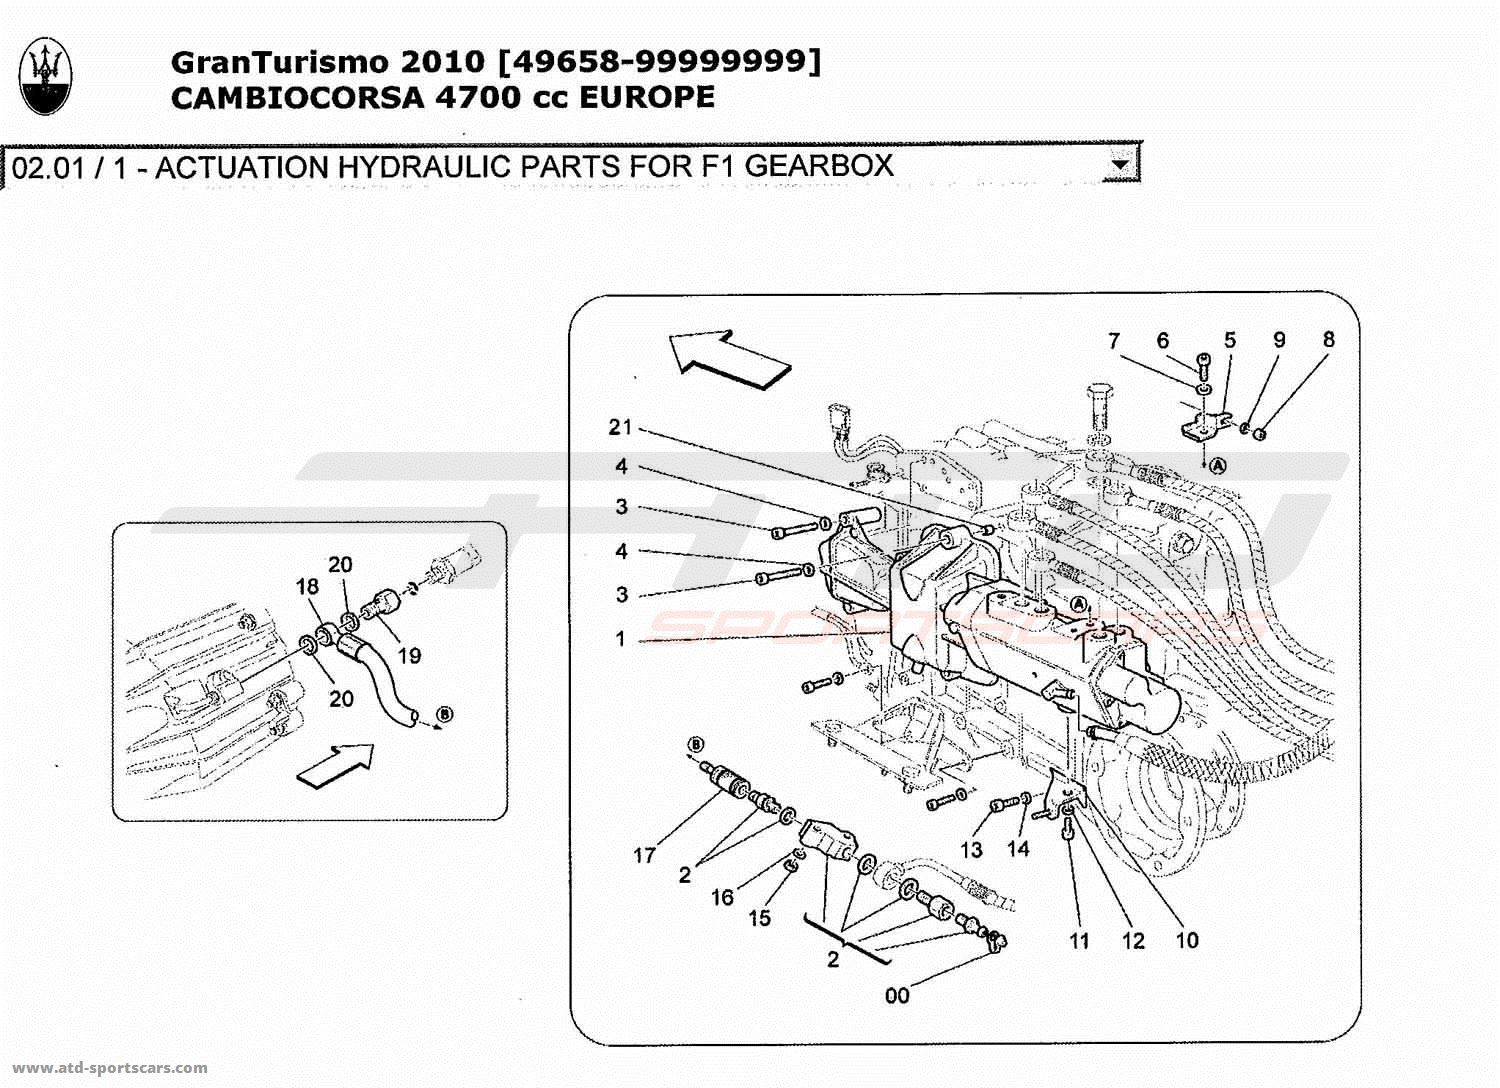 ACTUATION HYDRAULIC PARTS FOR F1 GEARBOX